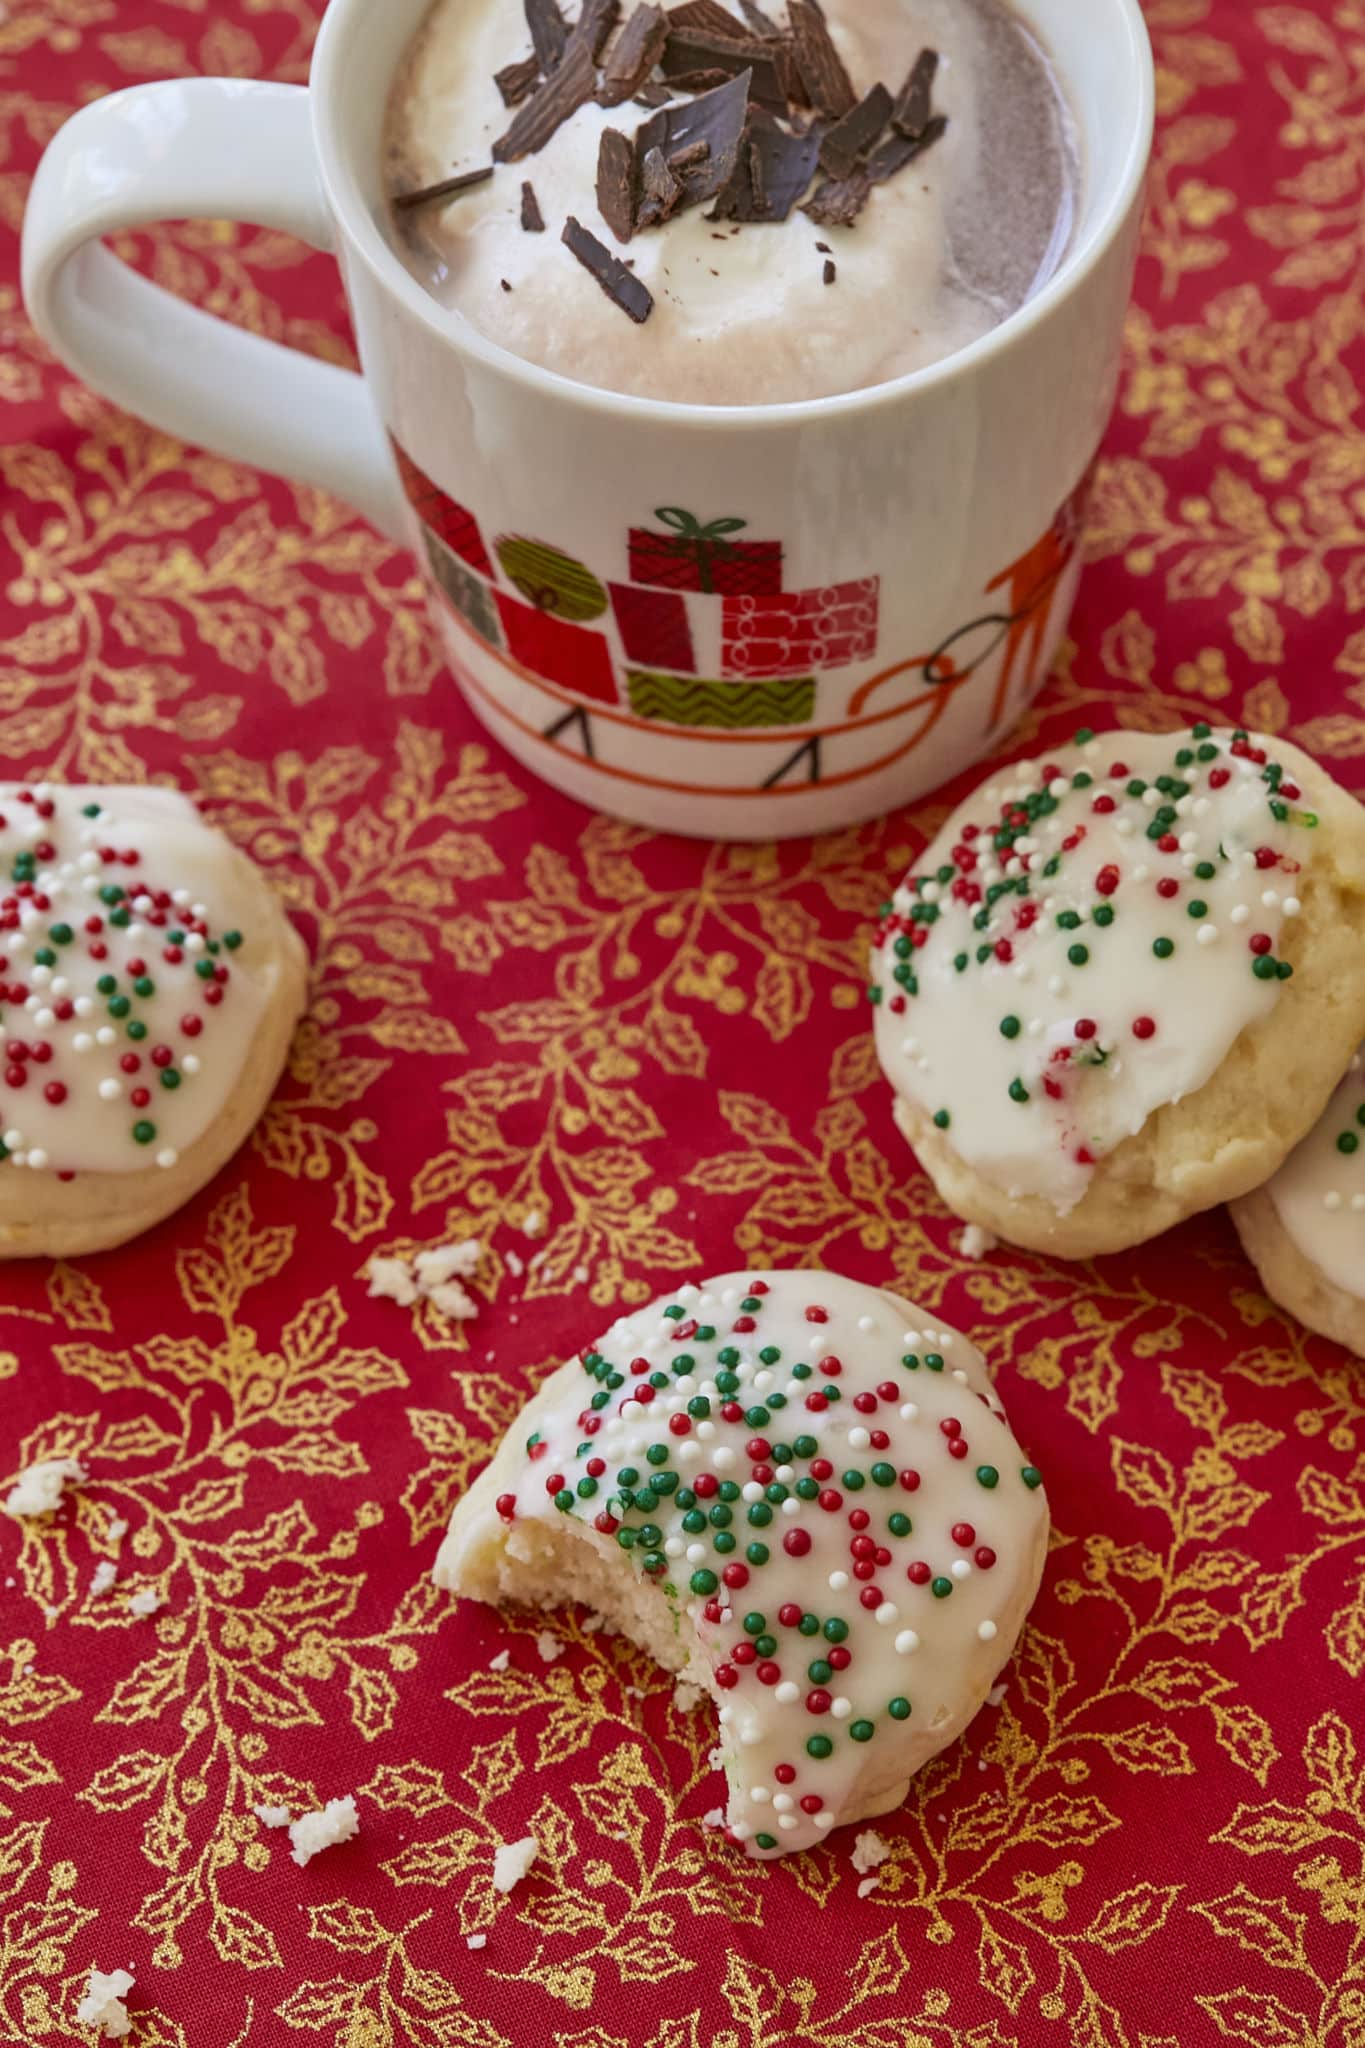 Four Italian Ricotta Cookies, one with a bite taken out of it showing its cake-like texture, are on a red table cloth with golden accents of holly berries. There is a mug of hot chocolate above them, topped with homemade whipped cream and chocolate shavings.